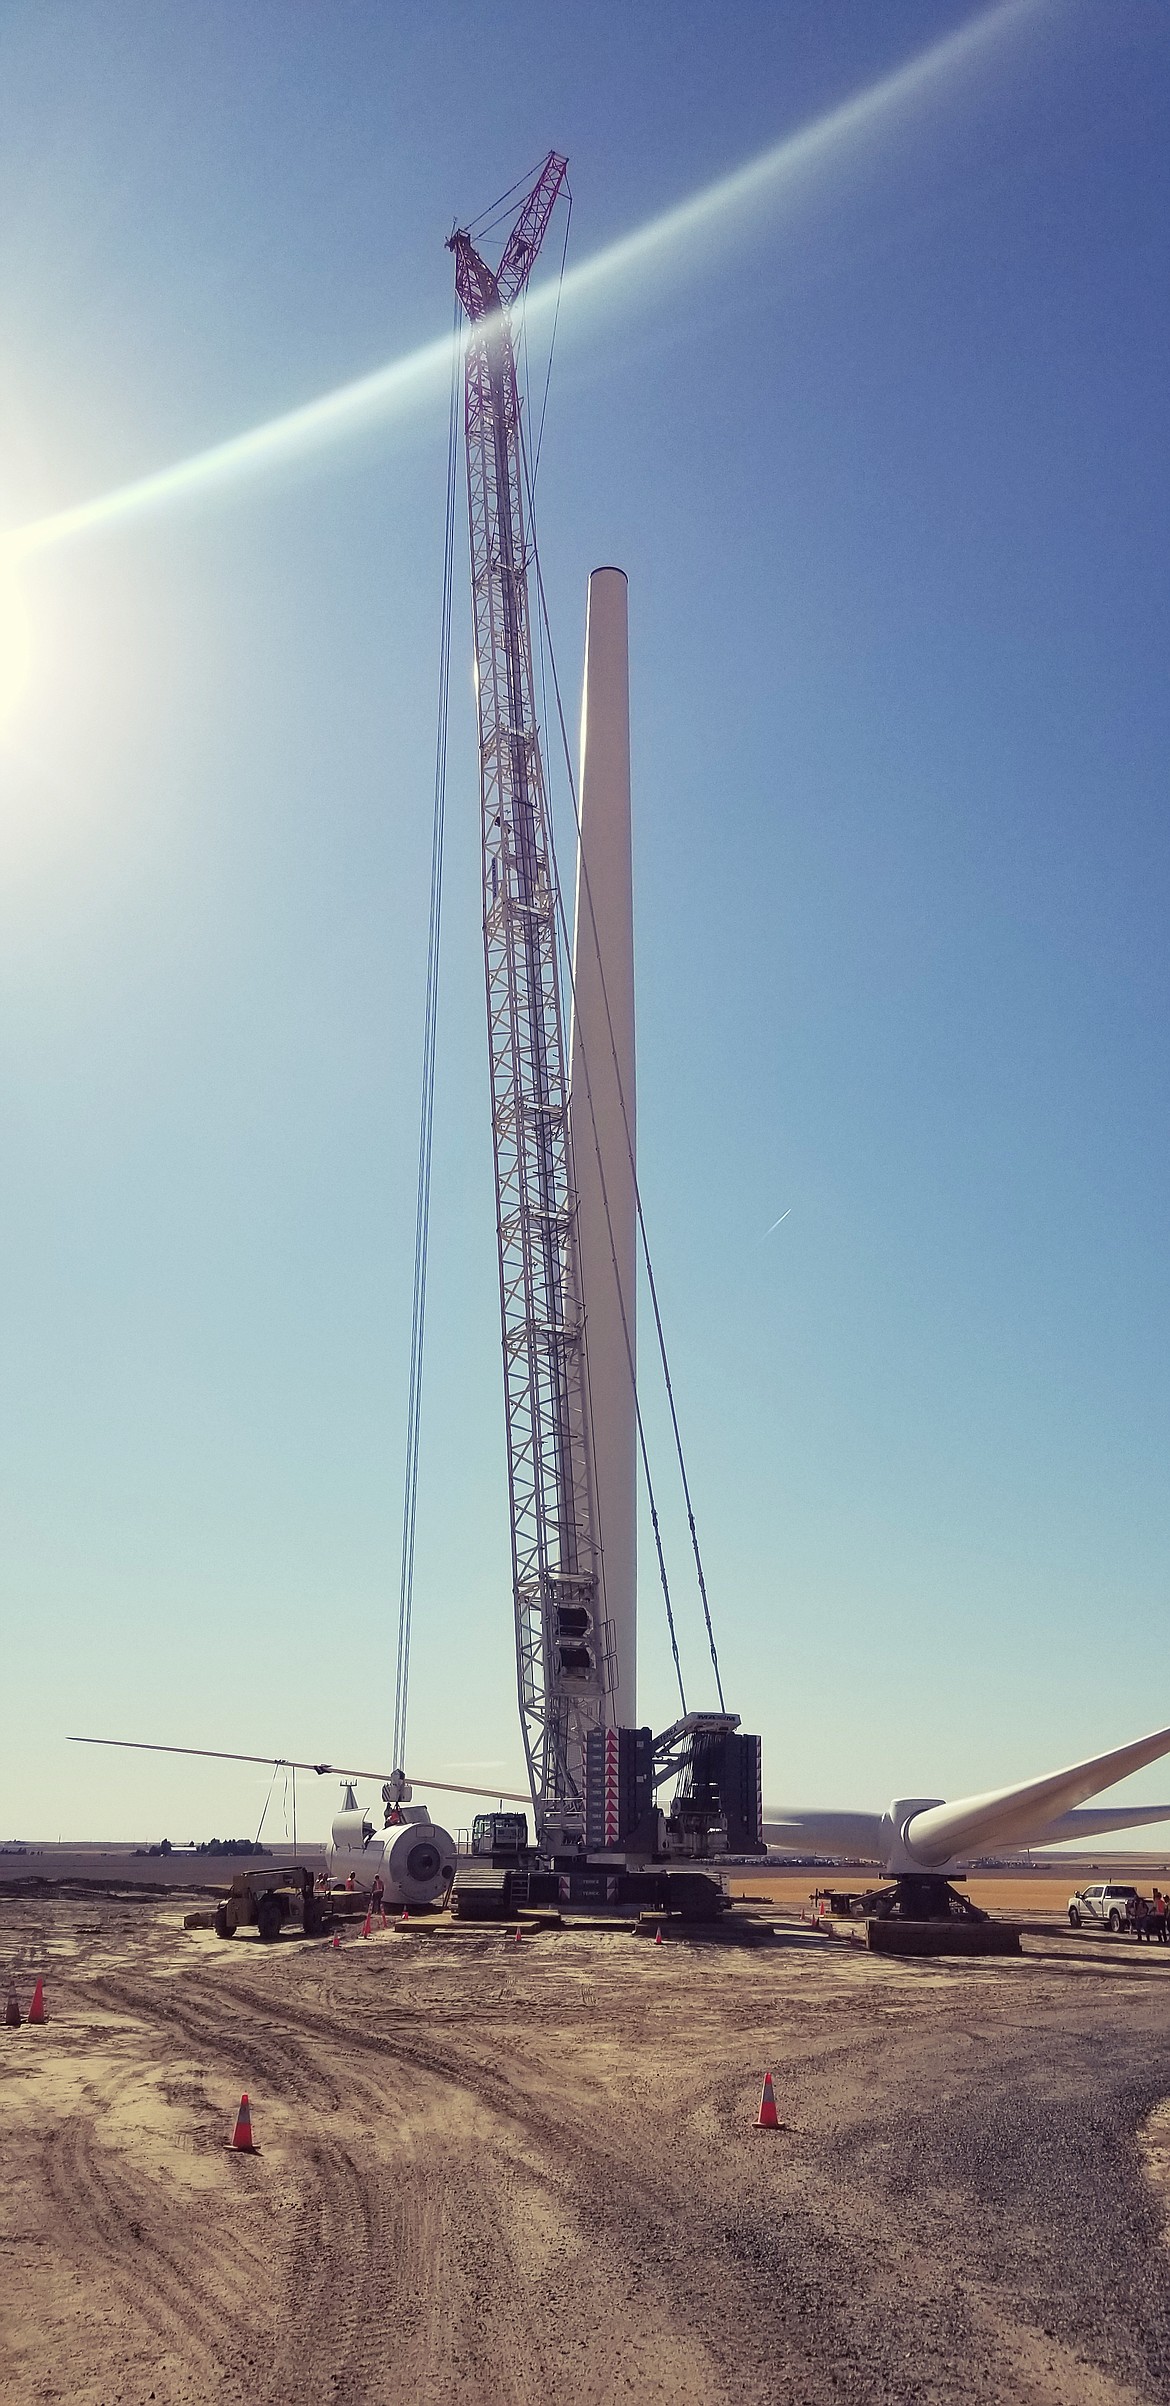 Workers with Clearwater Energy assemble a wind tower on Rattlesnake Flat earlier this summer.